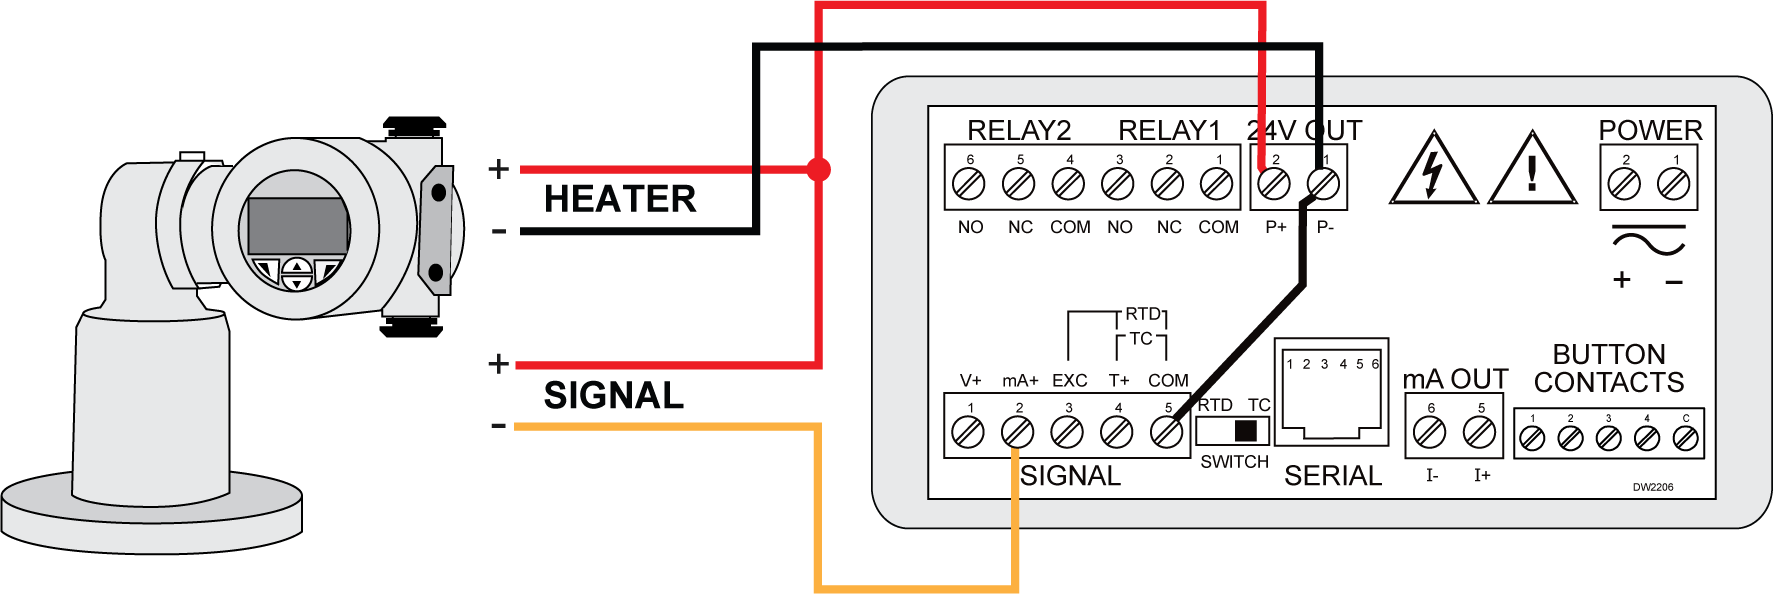 PD8-765 Powers Both the Heater and 4-20 mA Input Signal